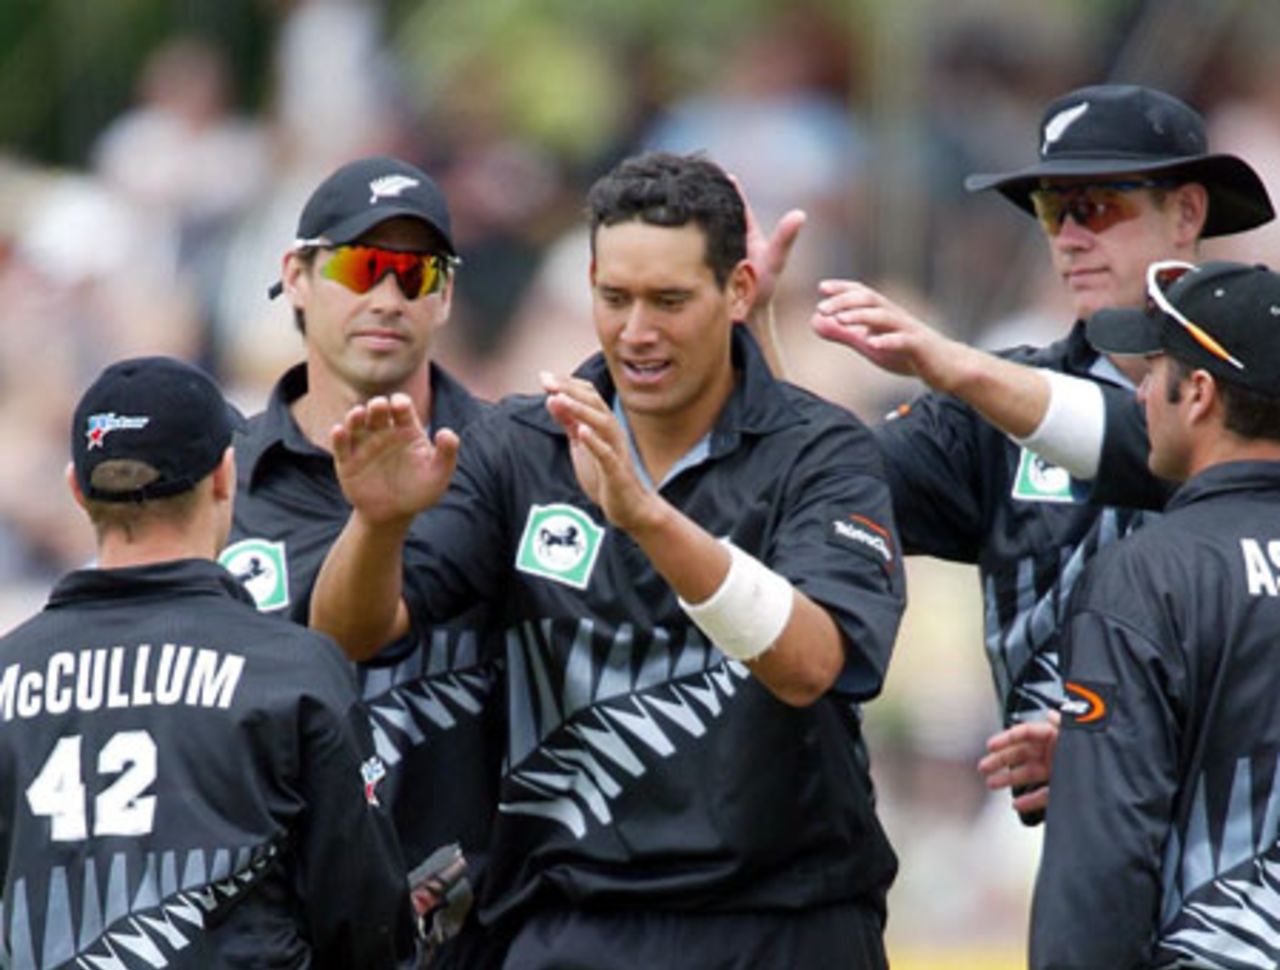 New Zealand bowler Daryl Tuffey (centre) is congratulated by team-mates Brendon McCullum (left), Stephen Fleming, Jacob Oram and Nathan Astle after dismissing Indian batsman Zaheer Khan, caught by wicket-keeper McCullum for one. 4th ODI: New Zealand v India at John Davies Oval, Queenstown, 4 January 2003.